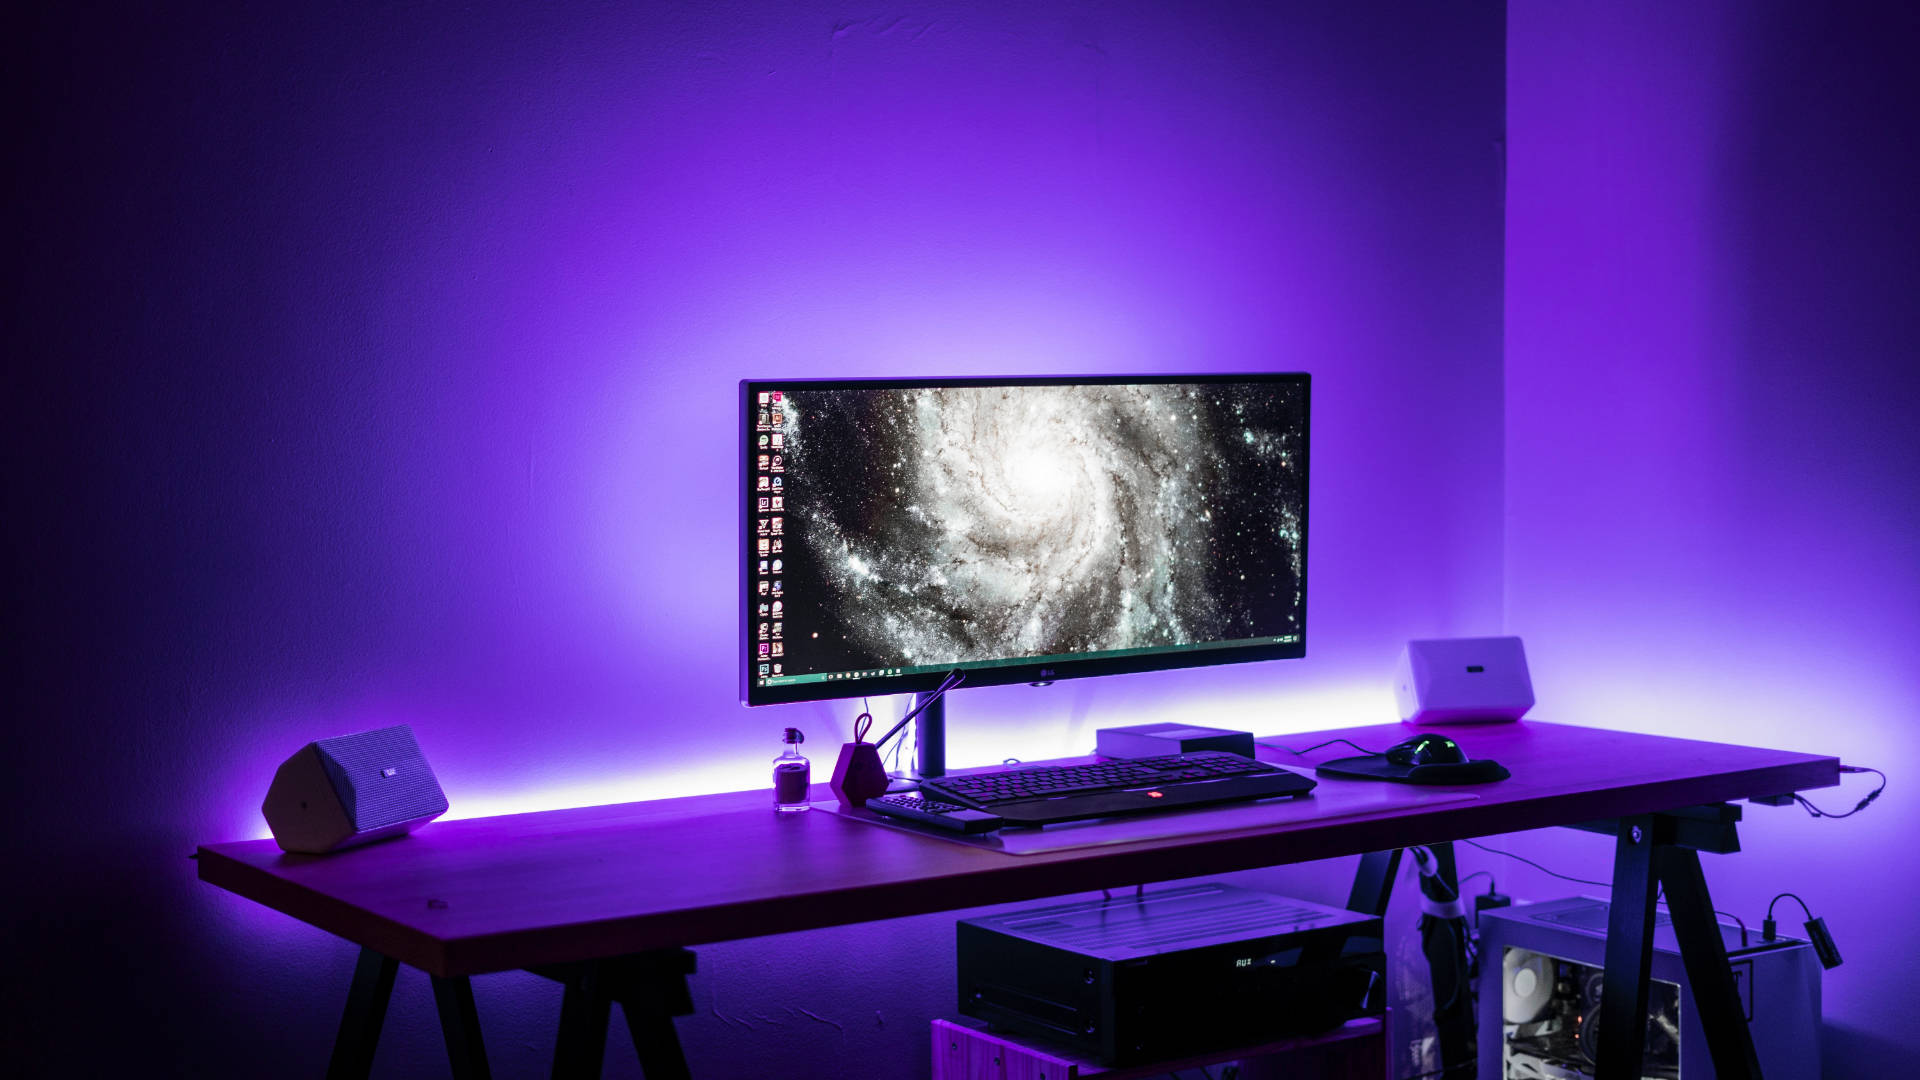 A High-end Gaming Setup In A Purple Themed Room